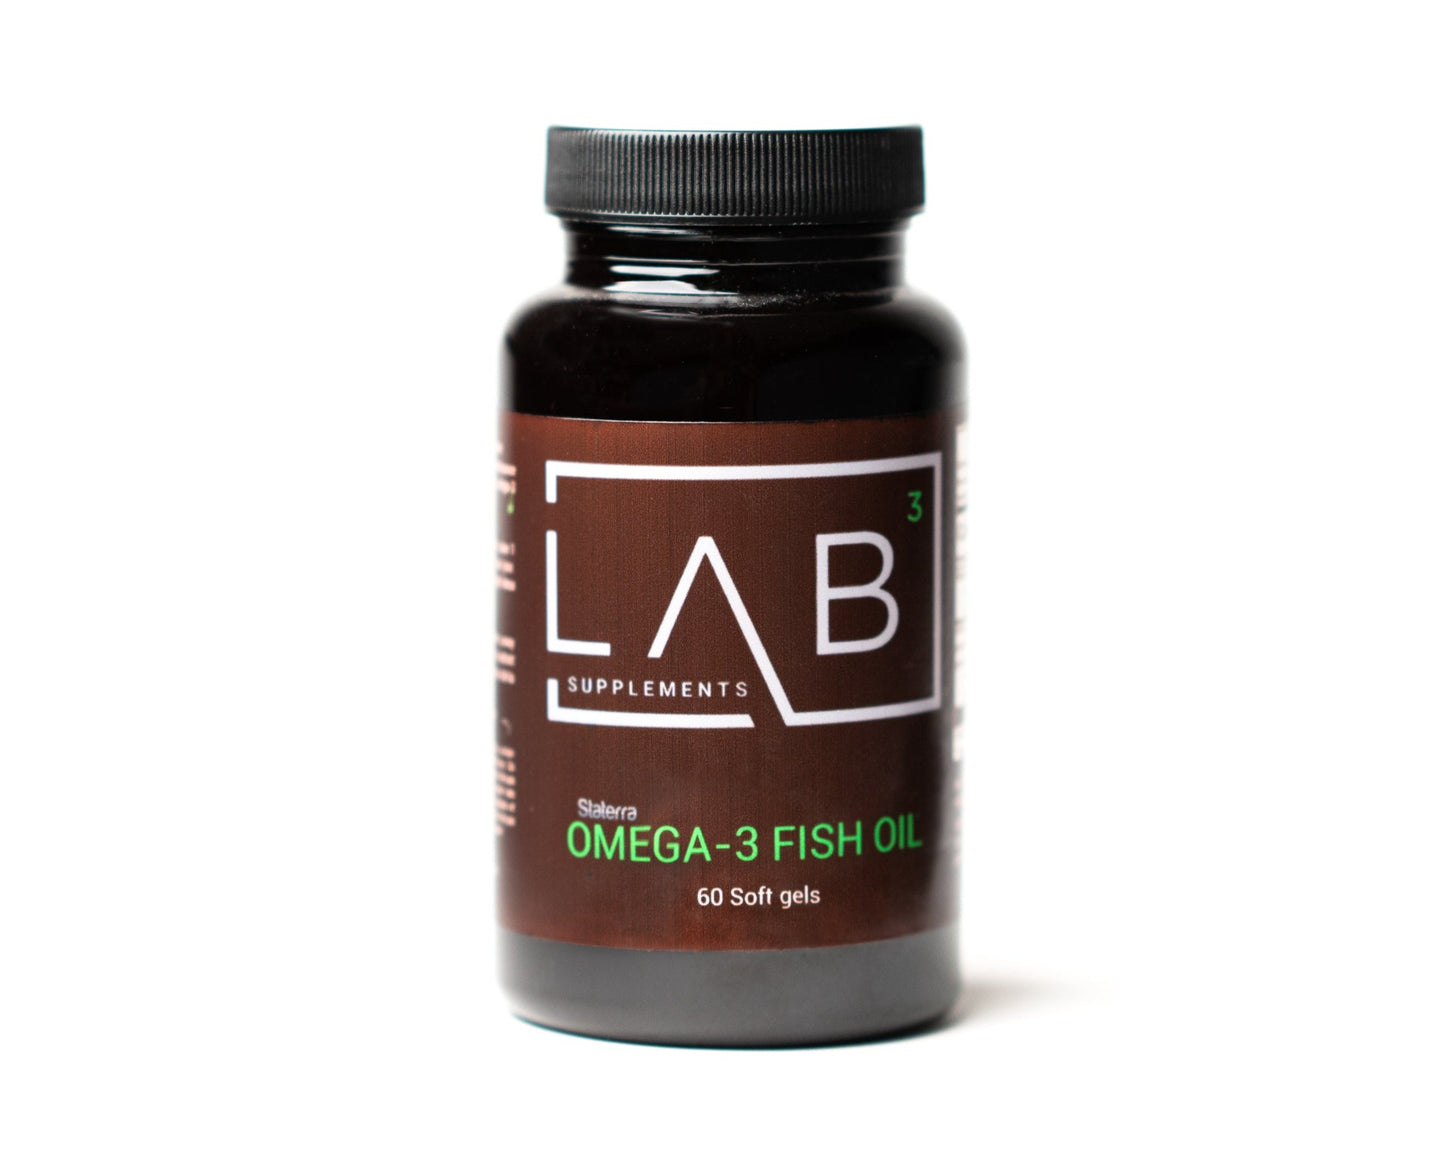 LAB branded Omega-3 Fish Oil supplement in small screw-top black bottle